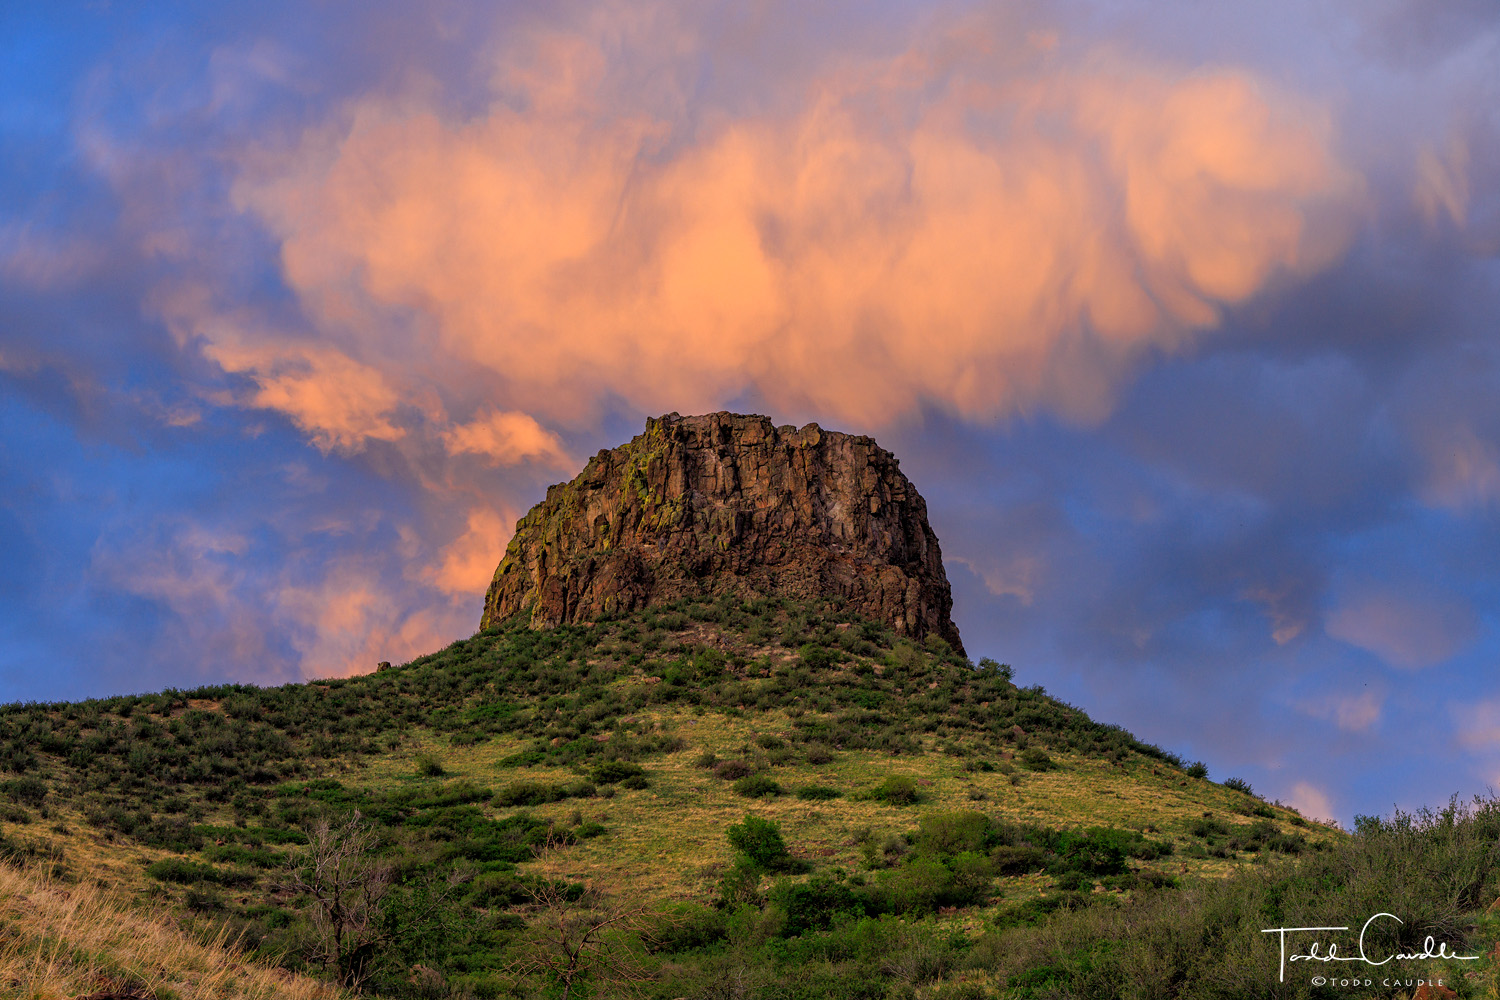 Sunset clouds over Castle Rock, a prominence on South Table Mountain in Golden, and the symbol of the foothills city.